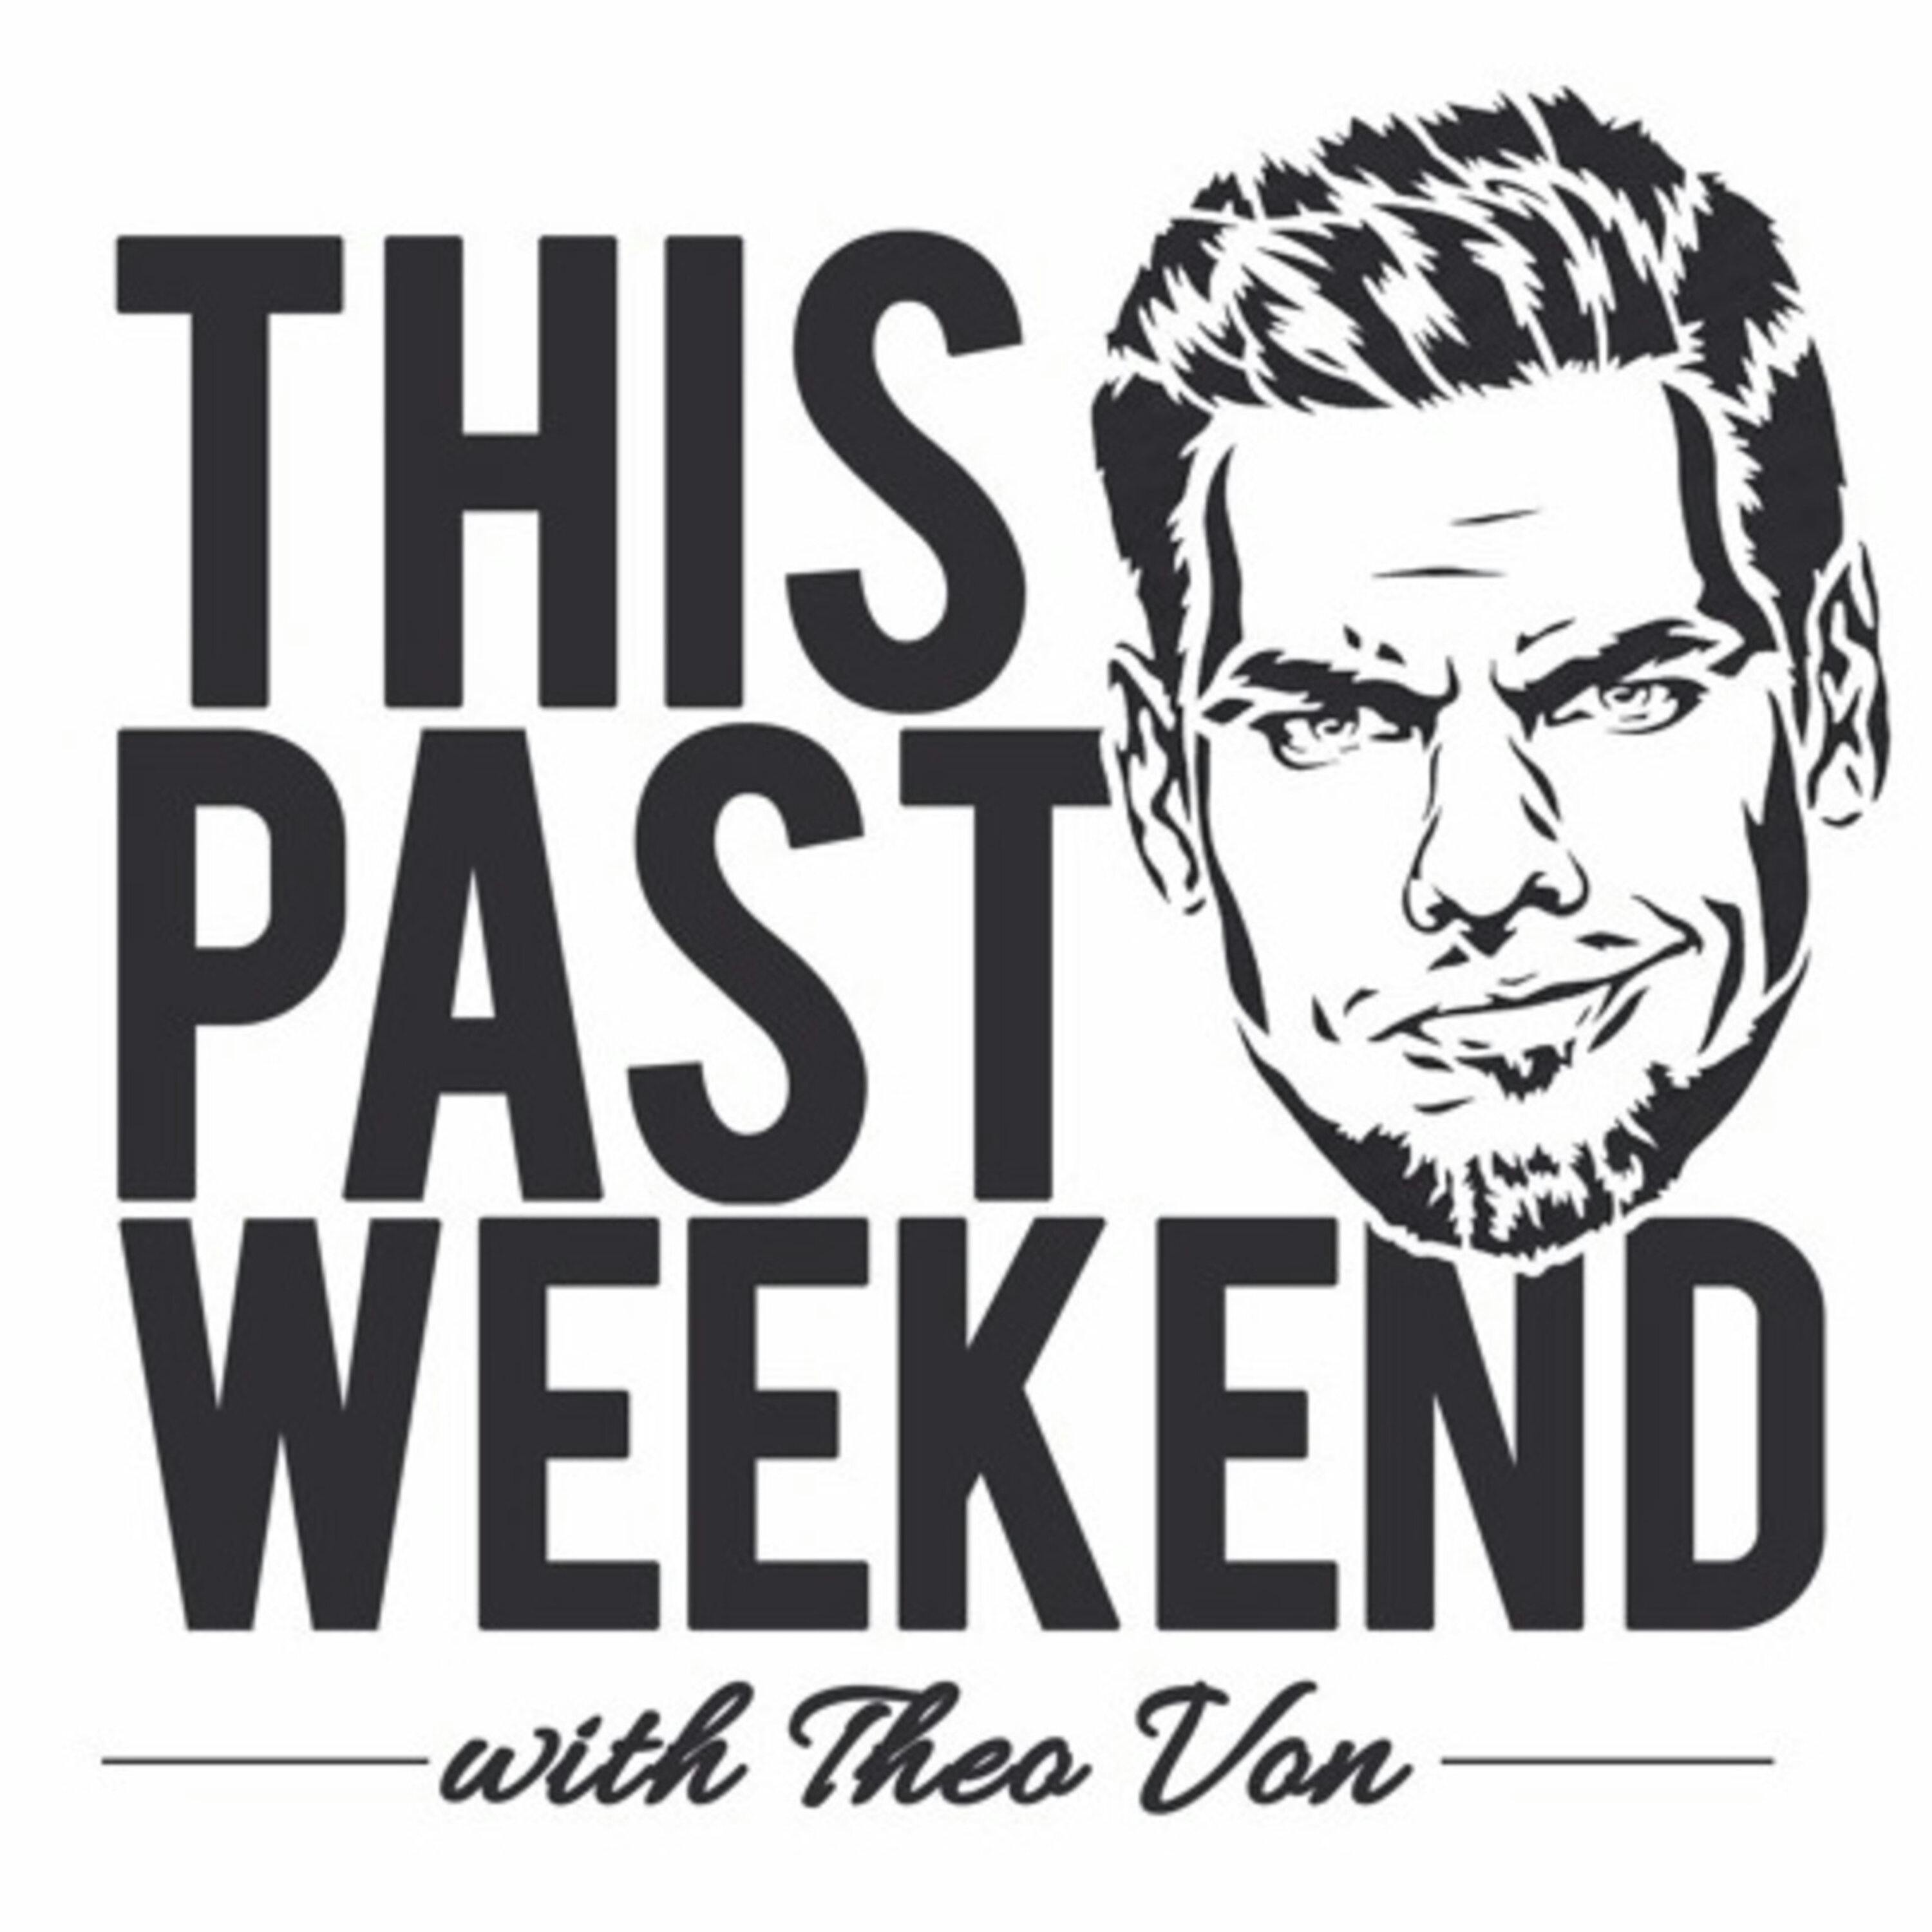 6-5-17 | This Past Weekend #24 by Theo Von